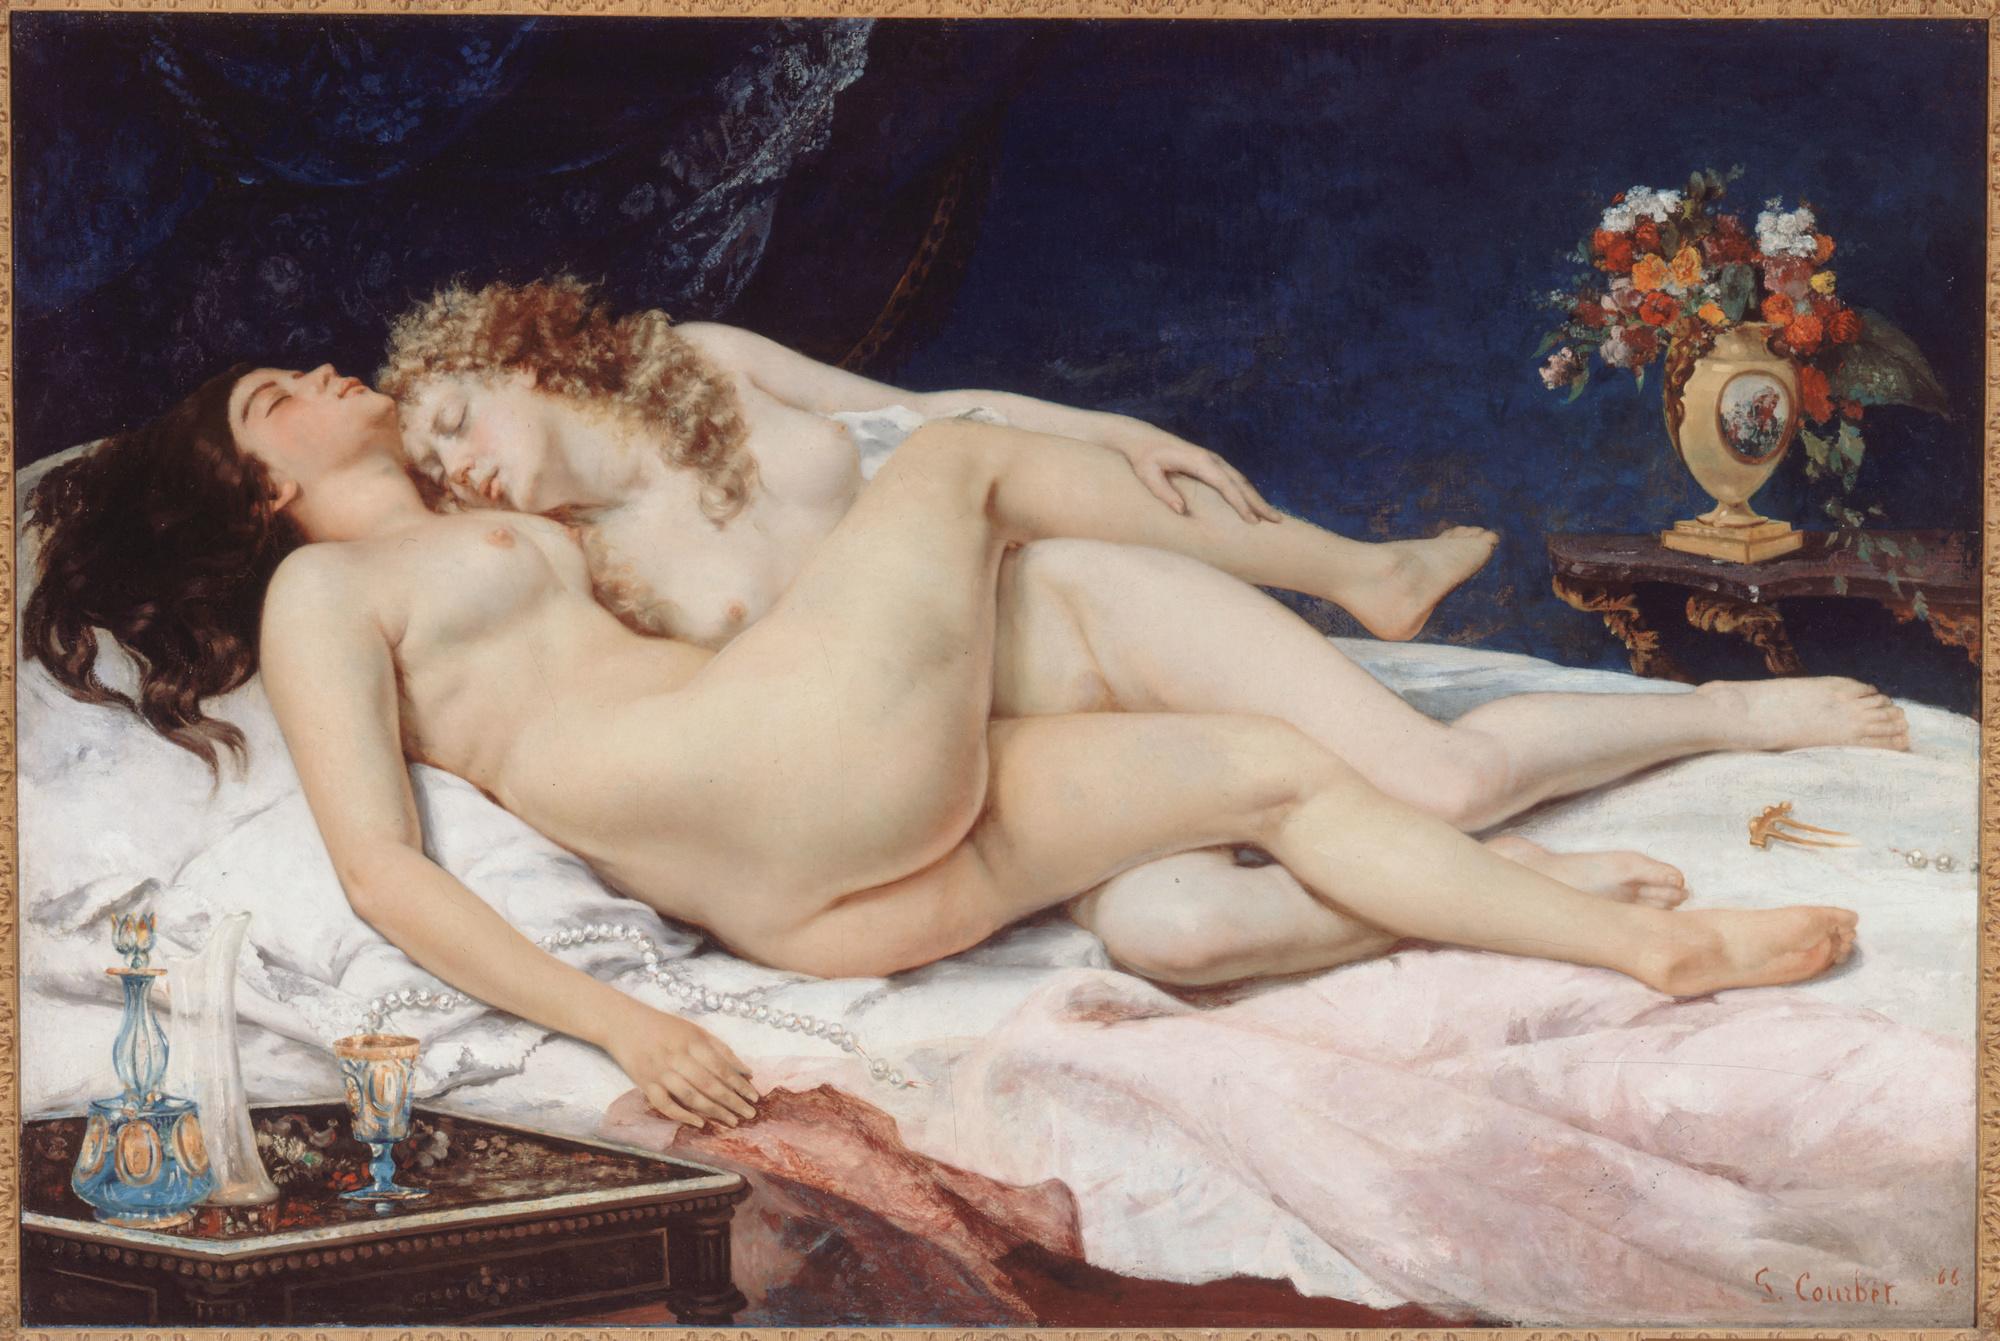 Le sommeil, Gustave Courbet, 1860